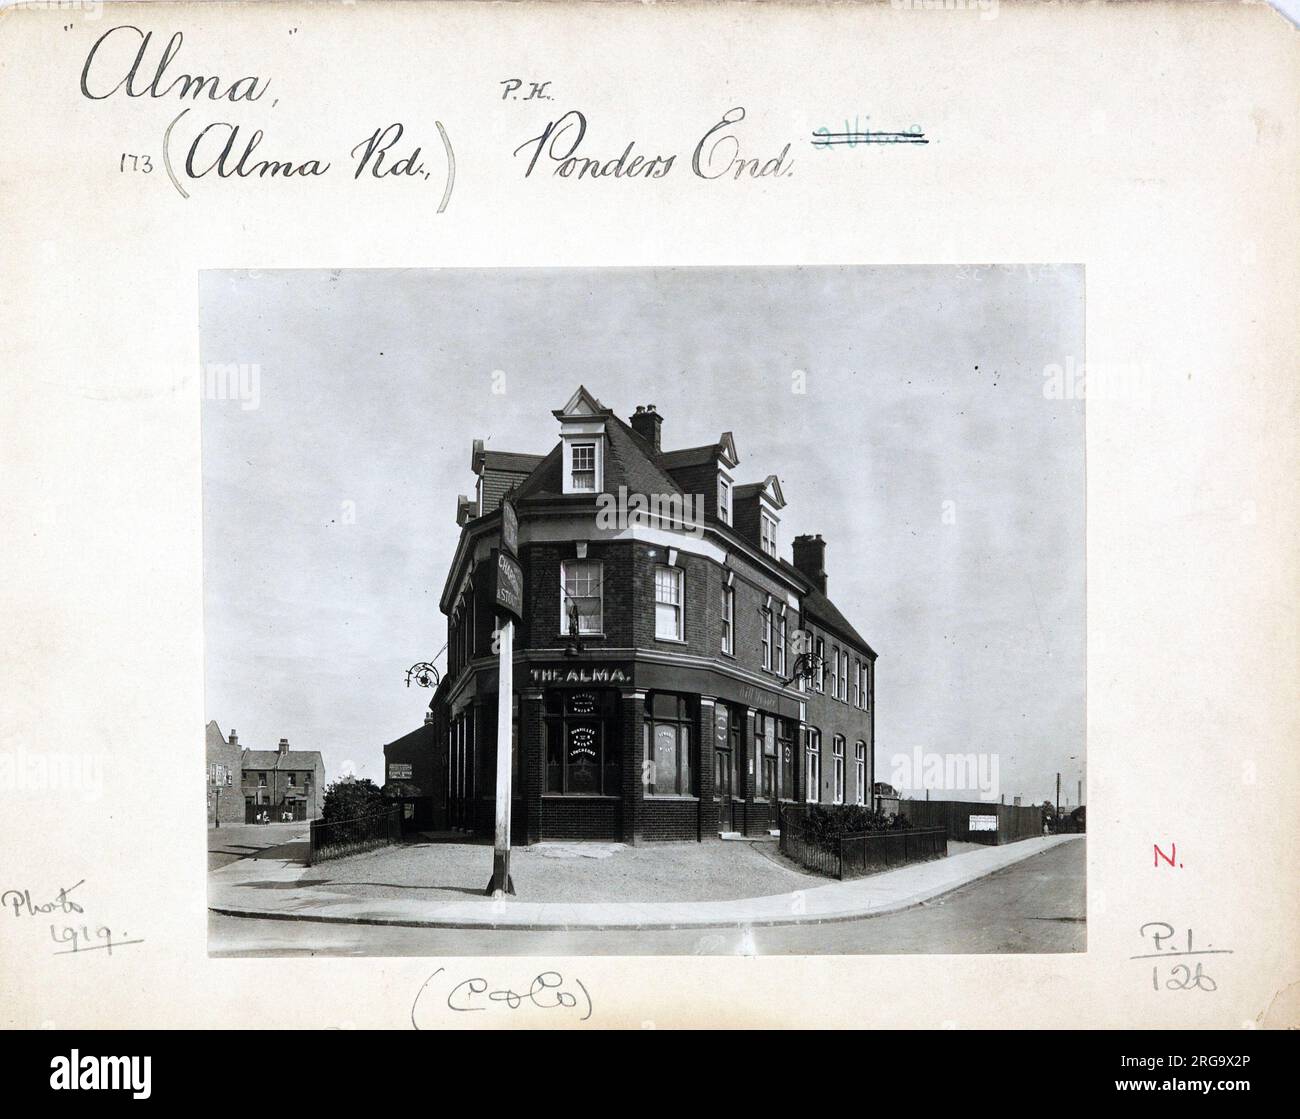 Photograph of Alma PH, Ponders End, Greater London. The main side